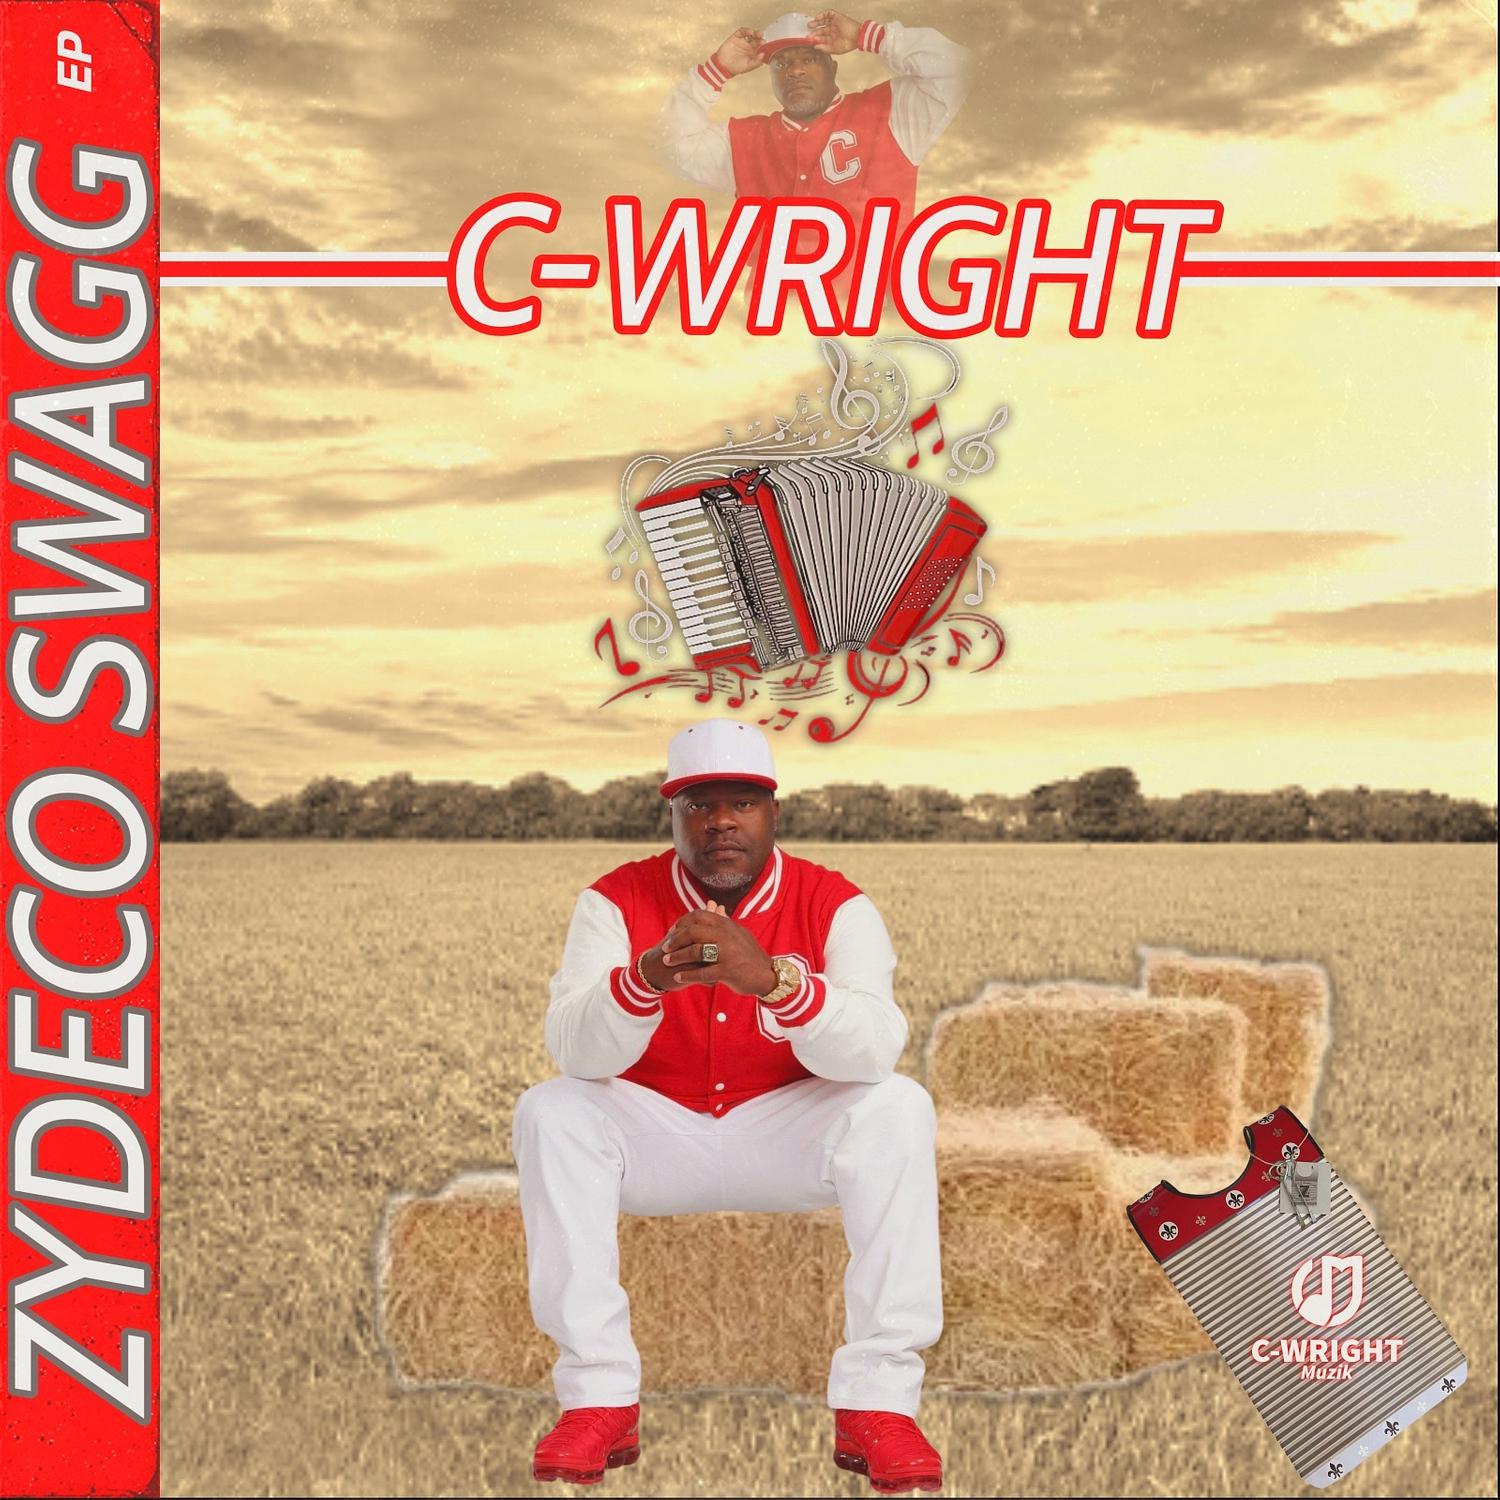 C-Wright - Zydeco Swagg Intro